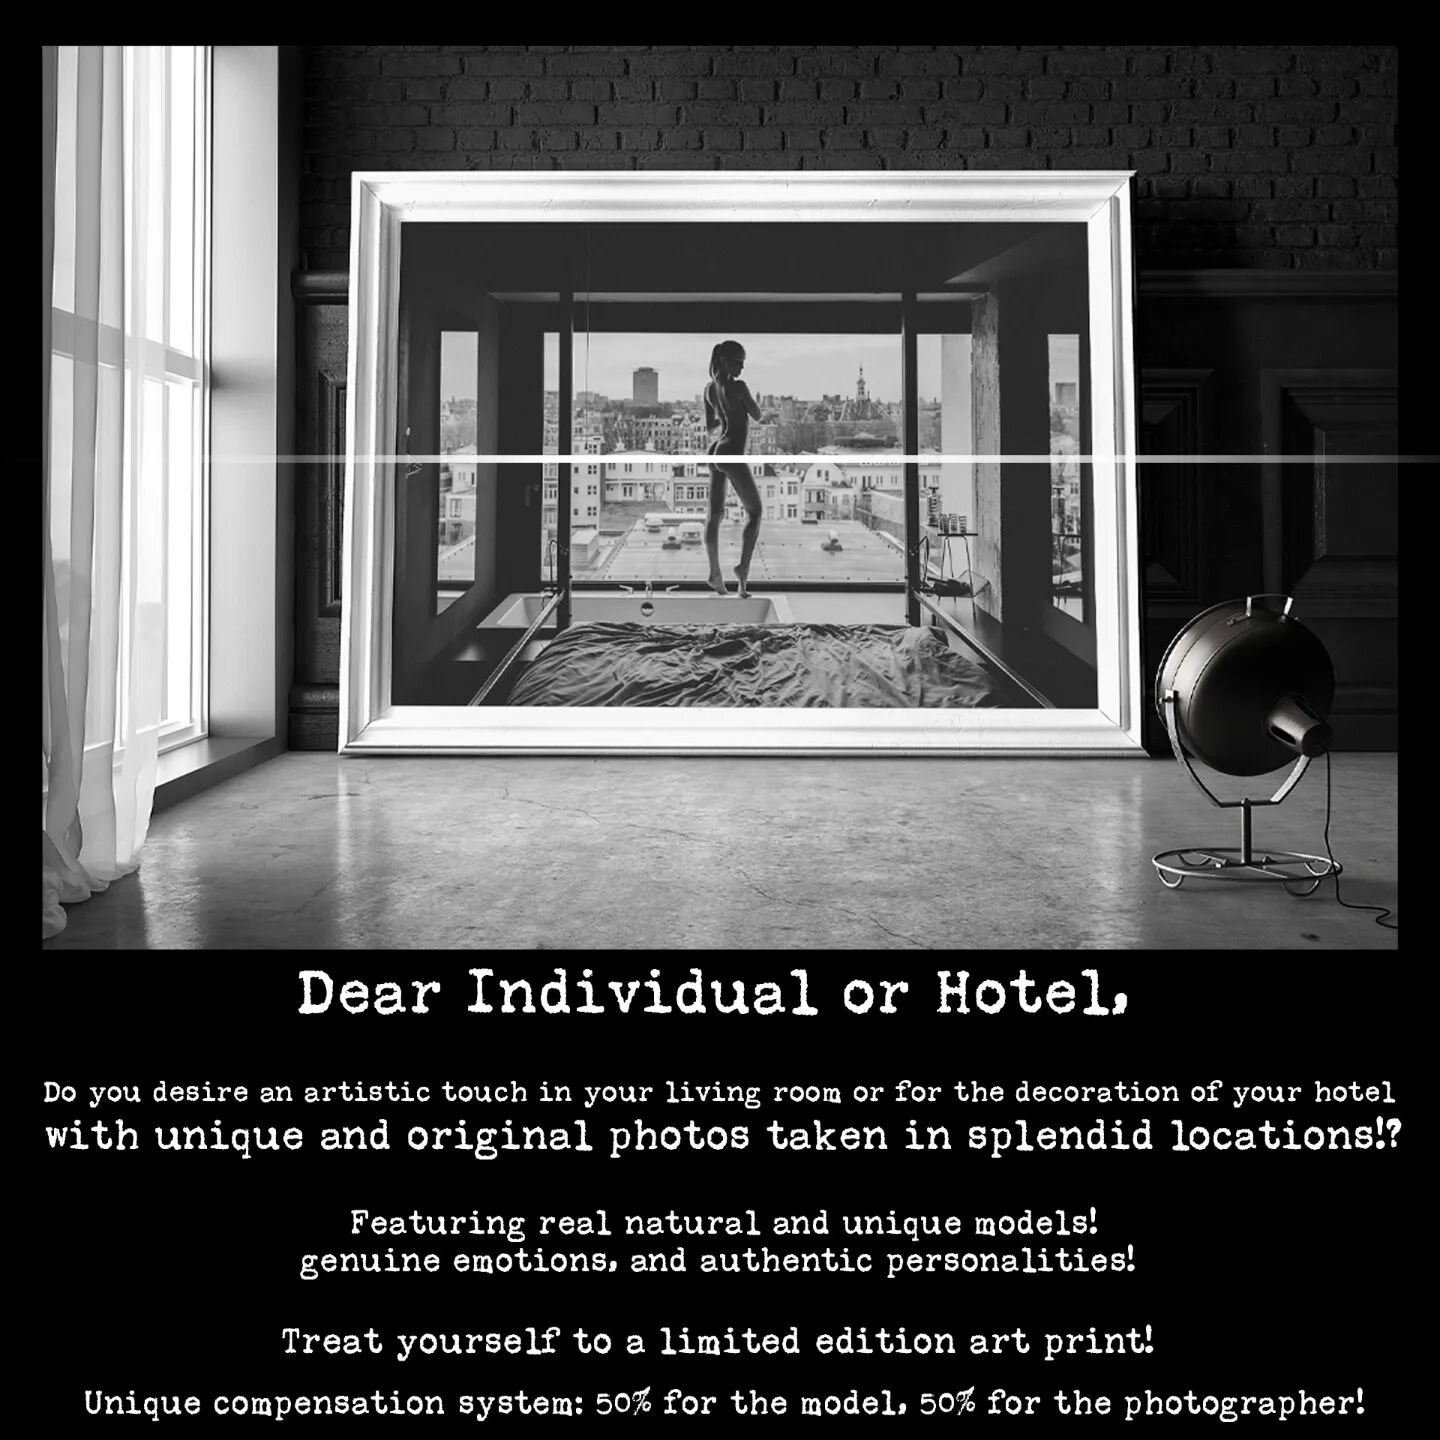 Dear Individual or Hotel, 
Do you desire an artistic touch in your living room or for the decoration of your hotel with unique and original photos taken in splendid locations!?

Featuring real natural and unique models, genuine emotions, and authenti